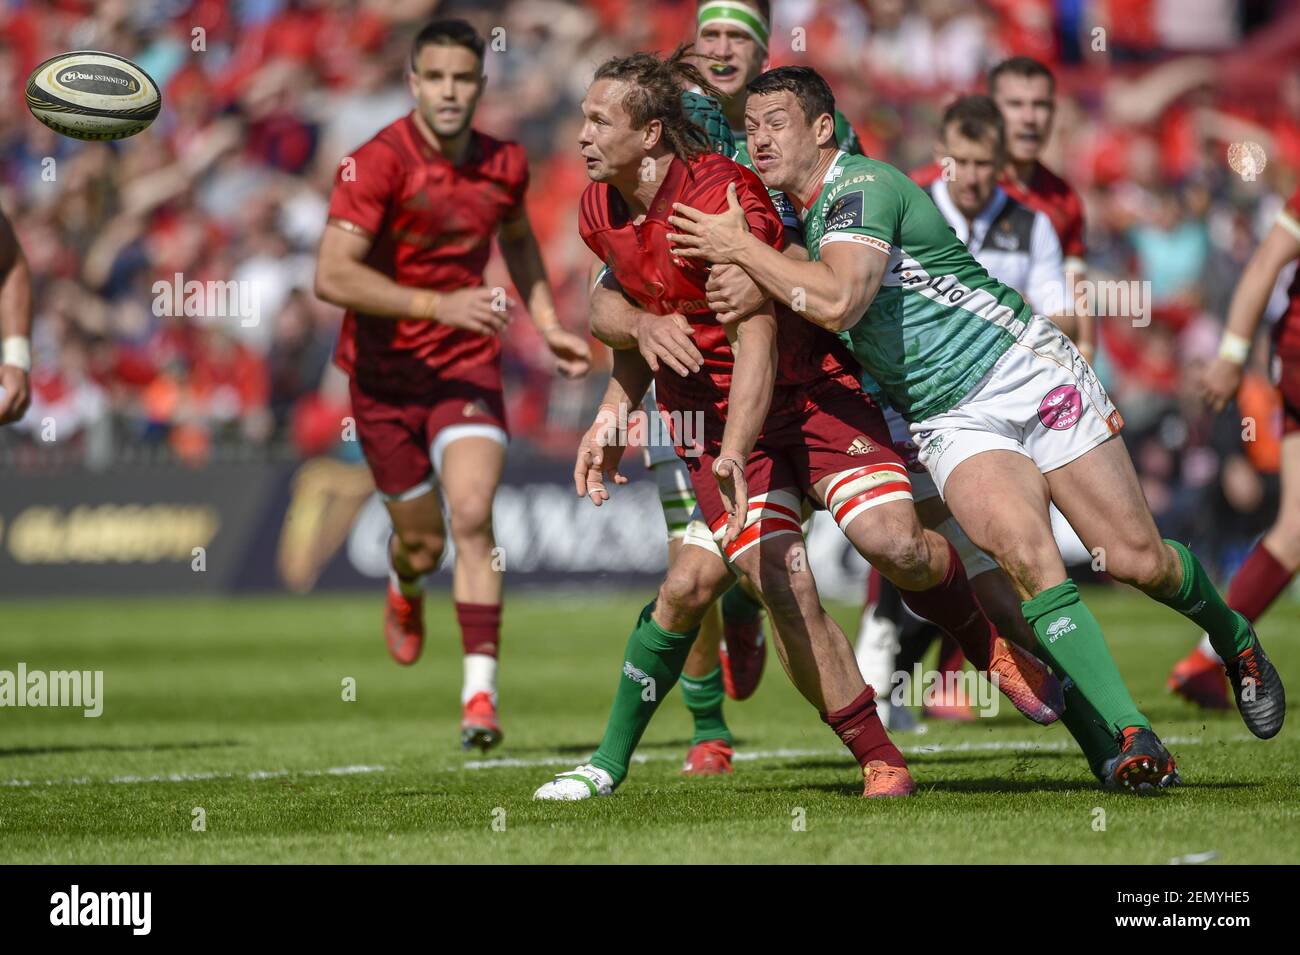 Arno Botha of Munster pass the ball during the Guinness PRO14 Quarter-Final  match between Munster Rugby and Benetton Treviso at Thomond Park Stadium in  Limerick, Ireland on May 4, 2019 (Photo by